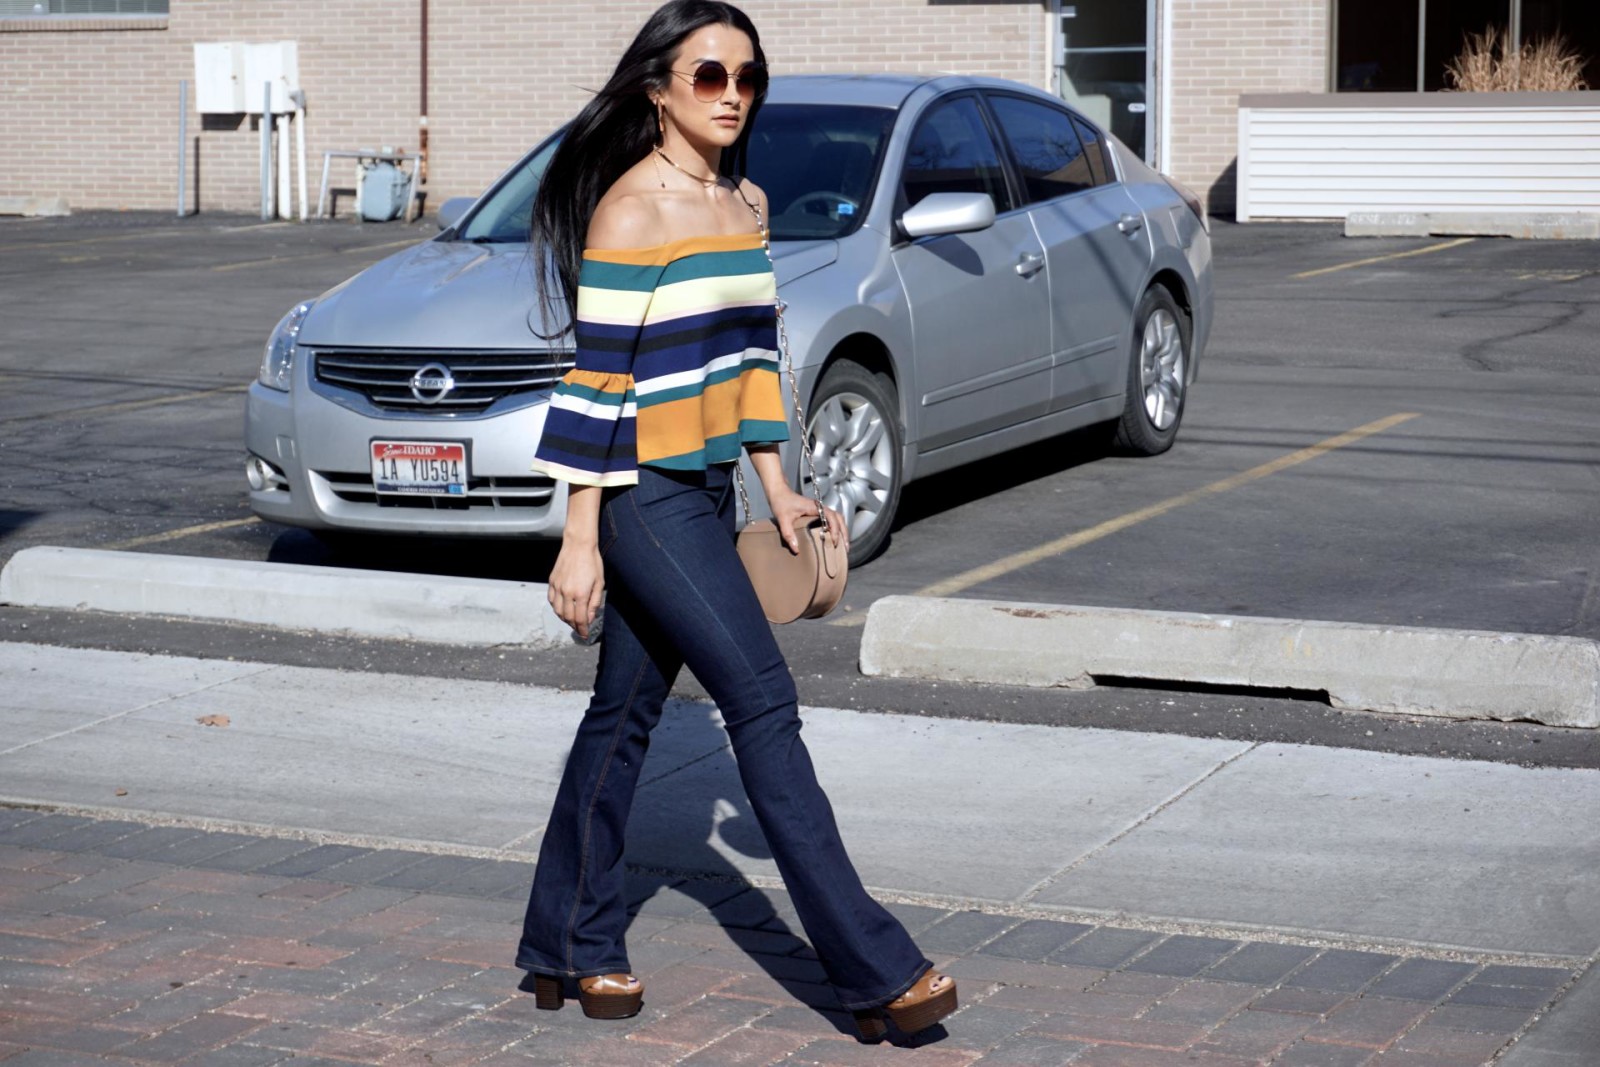 Striped Top, Zara Top, Zara Flares, Clogs, off the shoulder to, bell sleeves